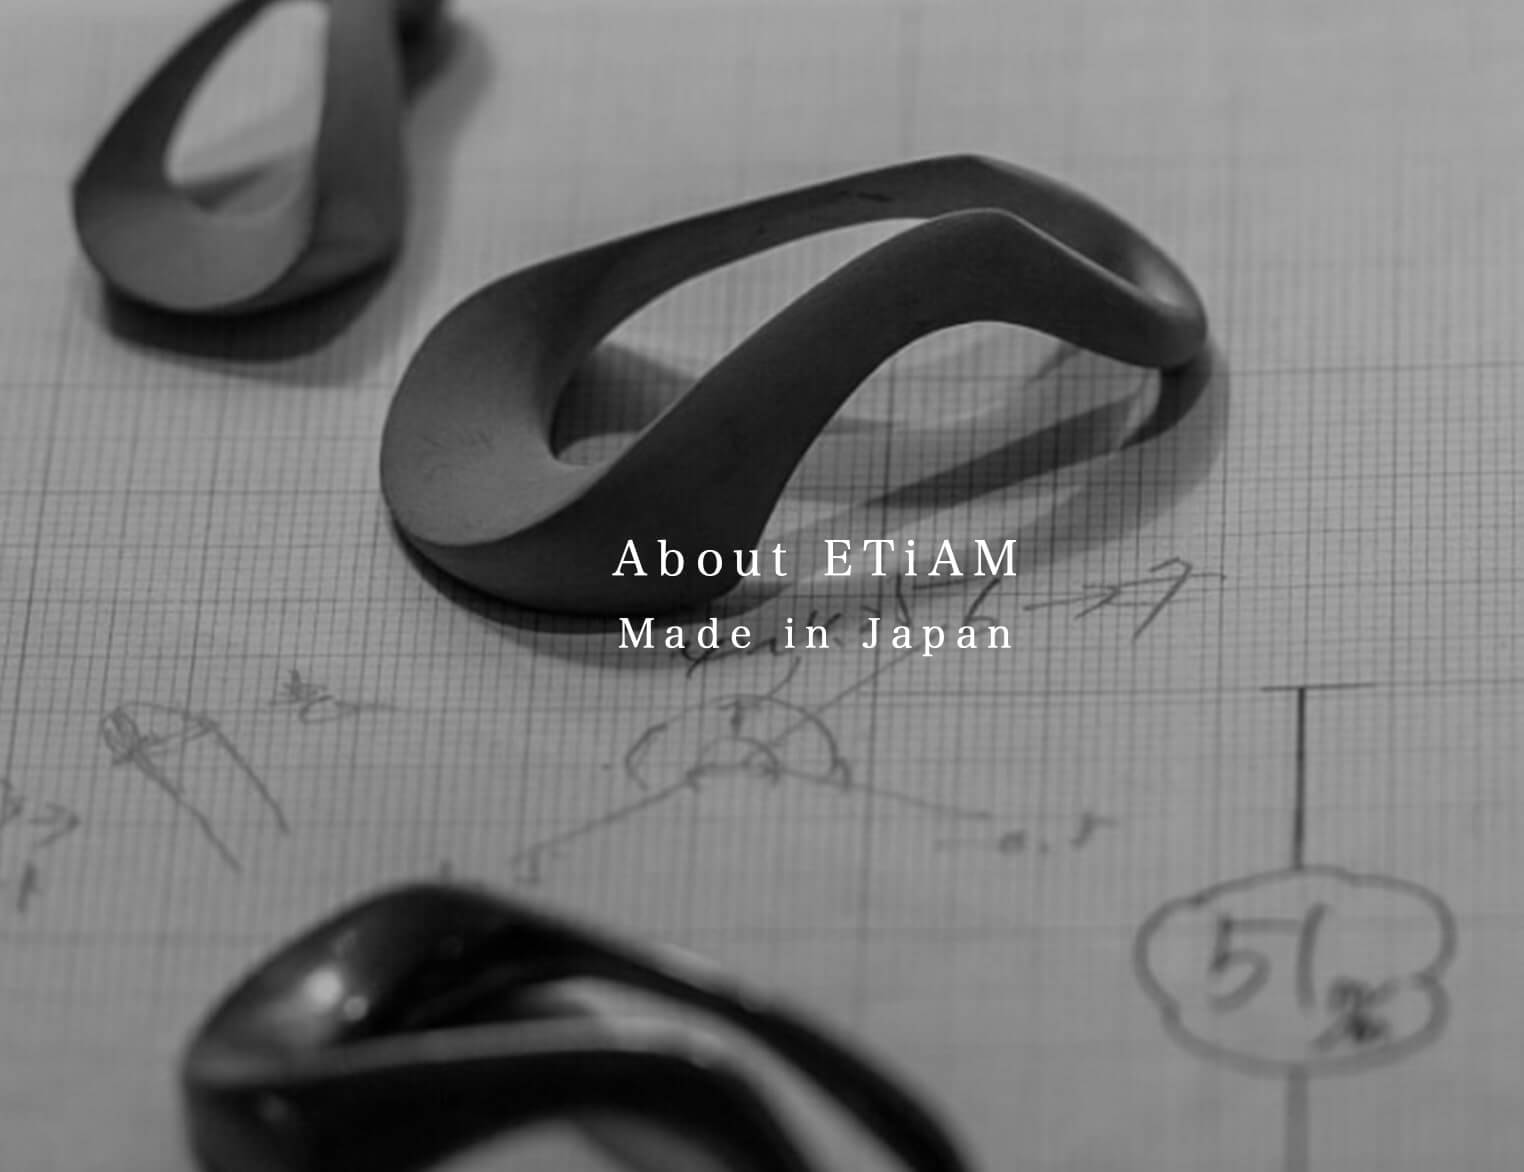 About ETiAM Made in Japan